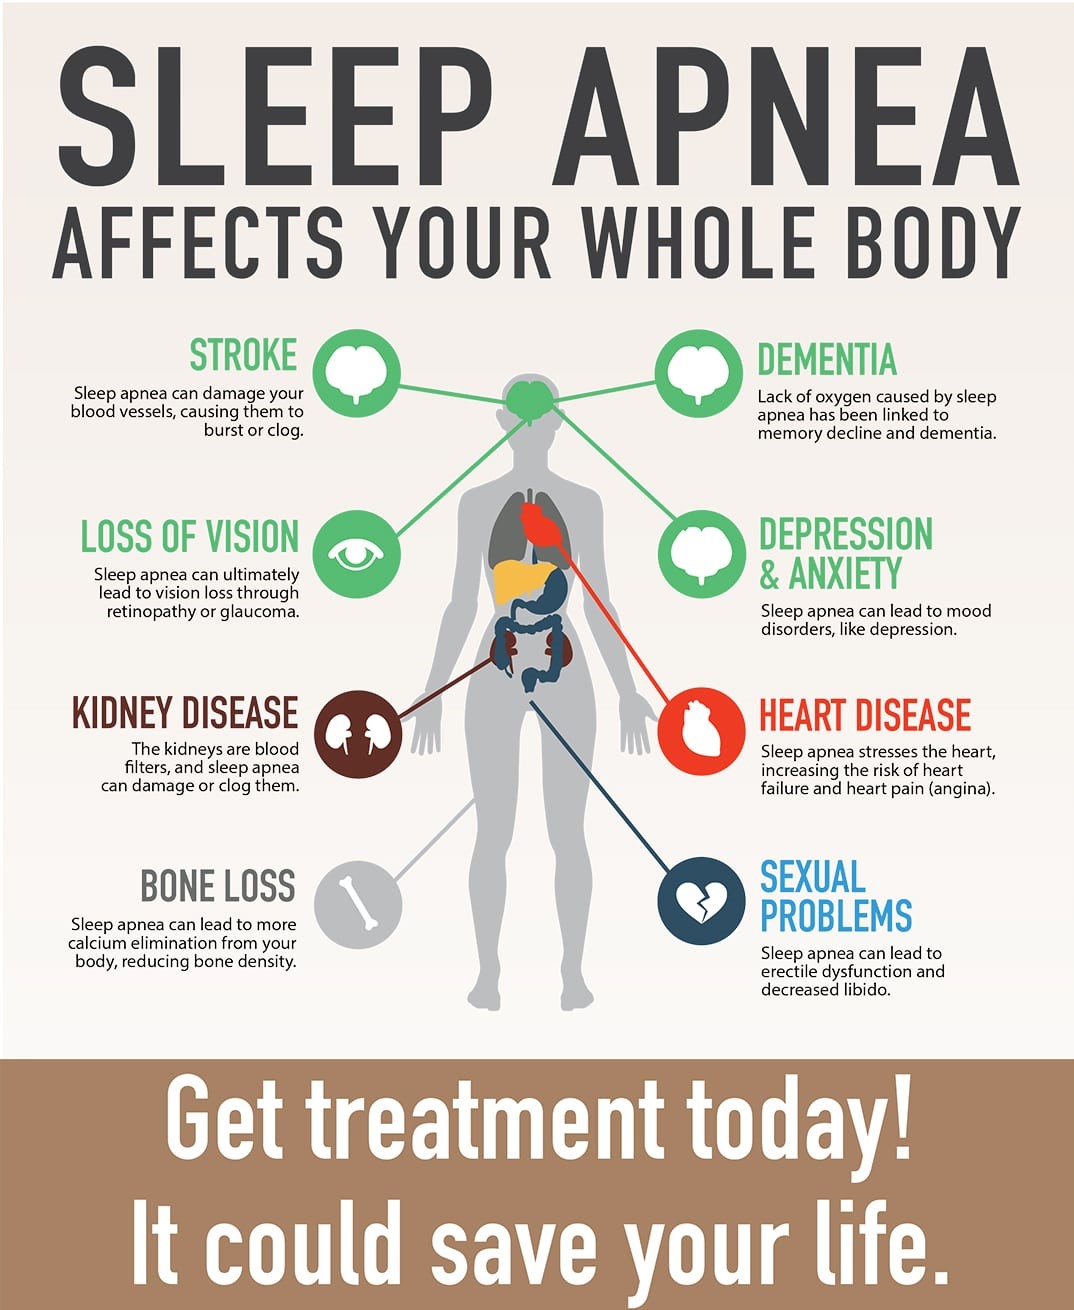 Without Sleep Apnea Treatment, More Than Your Sleep Can Be Affected!